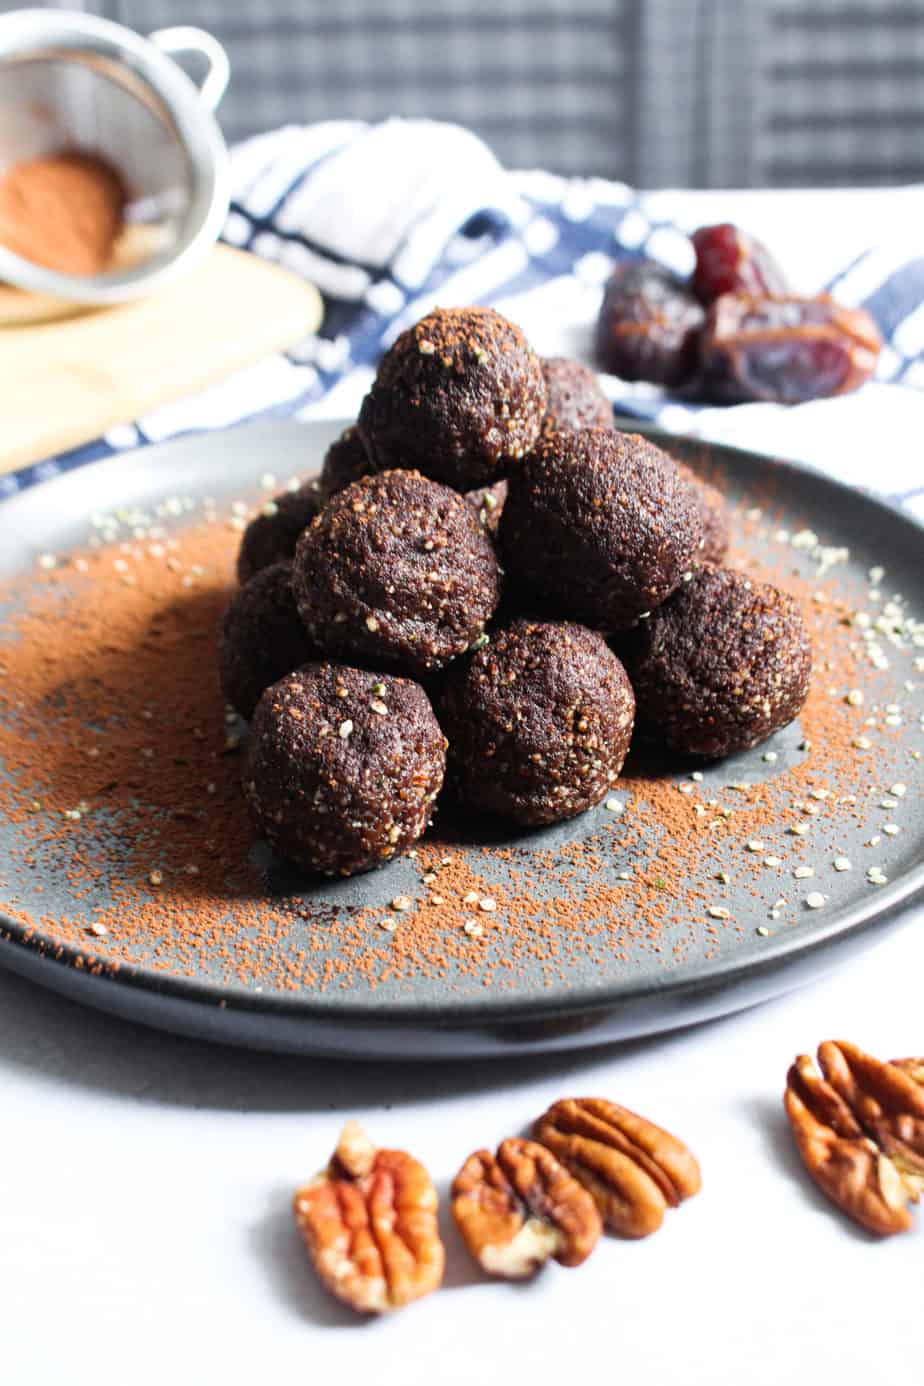 pile of chocolate truffles on plate, dusted with cocoa powder